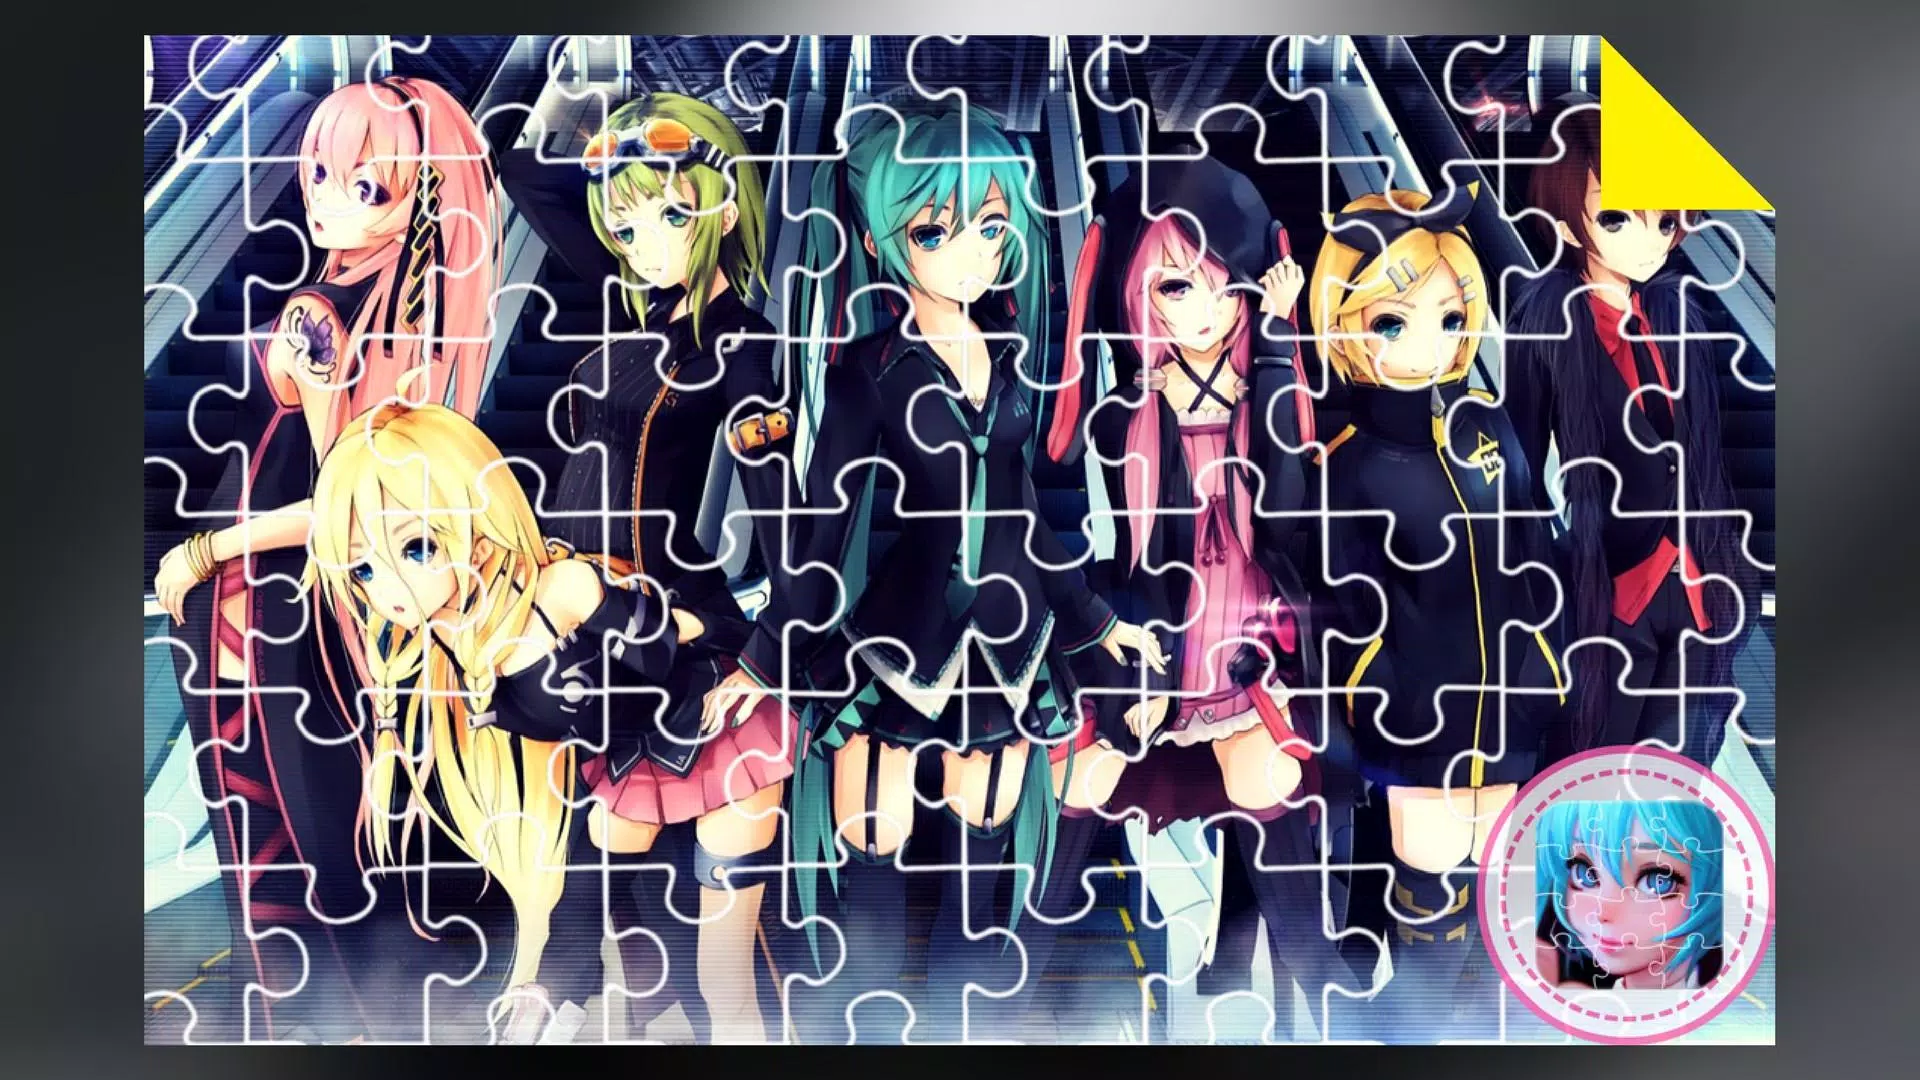 Anime Jigsaw Puzzles Games: Hatsune Miku Puzzle for Android - APK Download